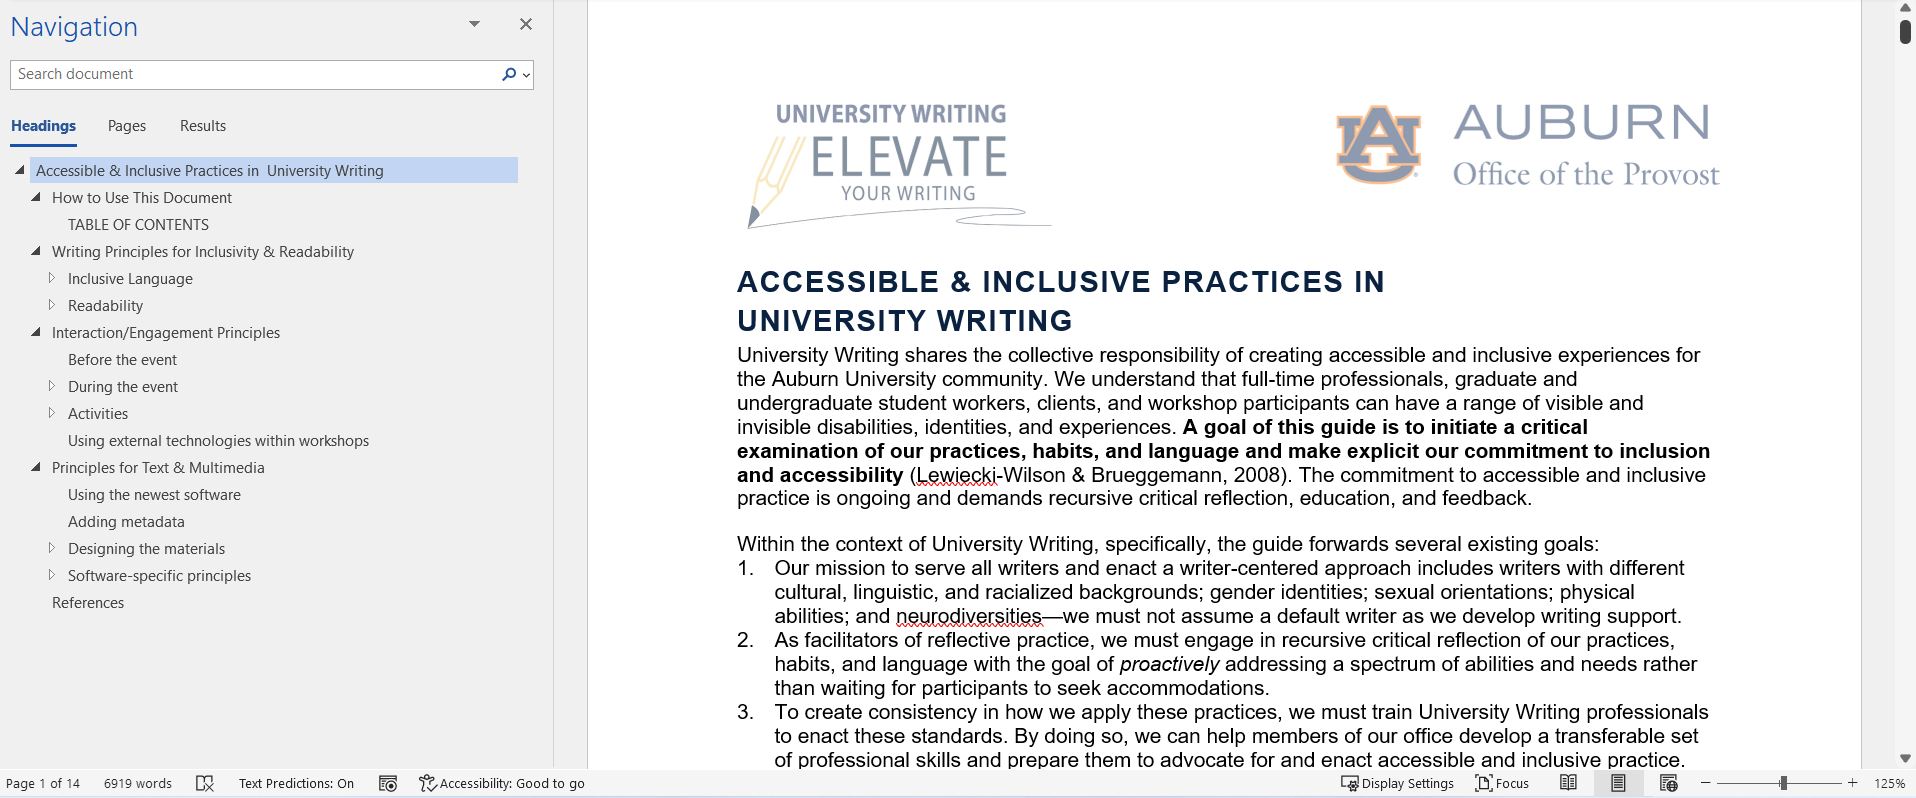 "Accessible and Inclusive Practices" document with navigation pane open   